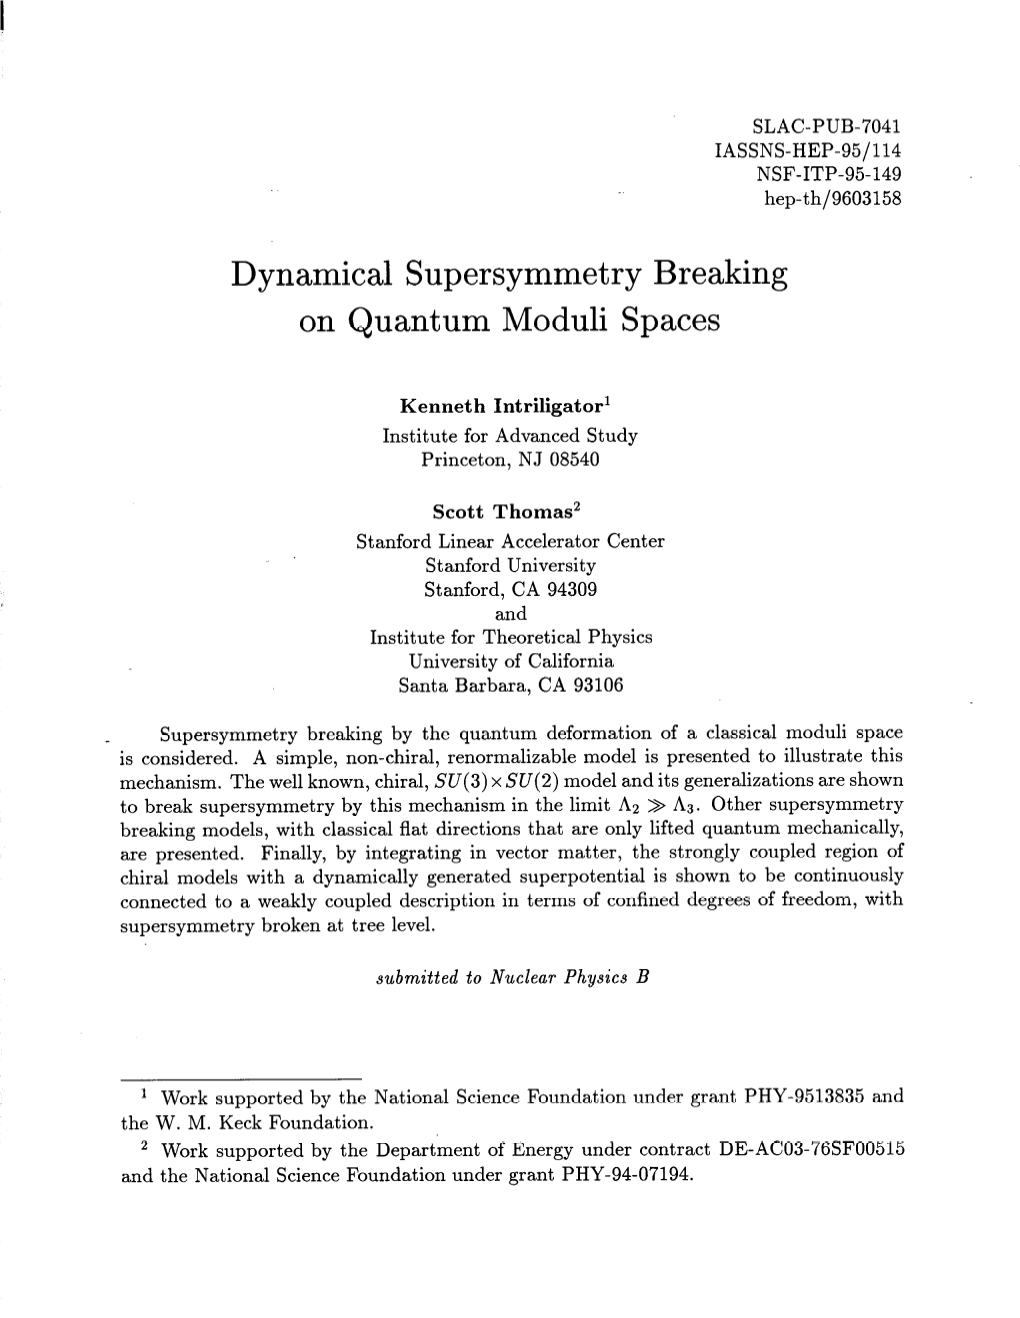 Dynamical Supersymmetry Breaking on Quantum Moduli Spaces